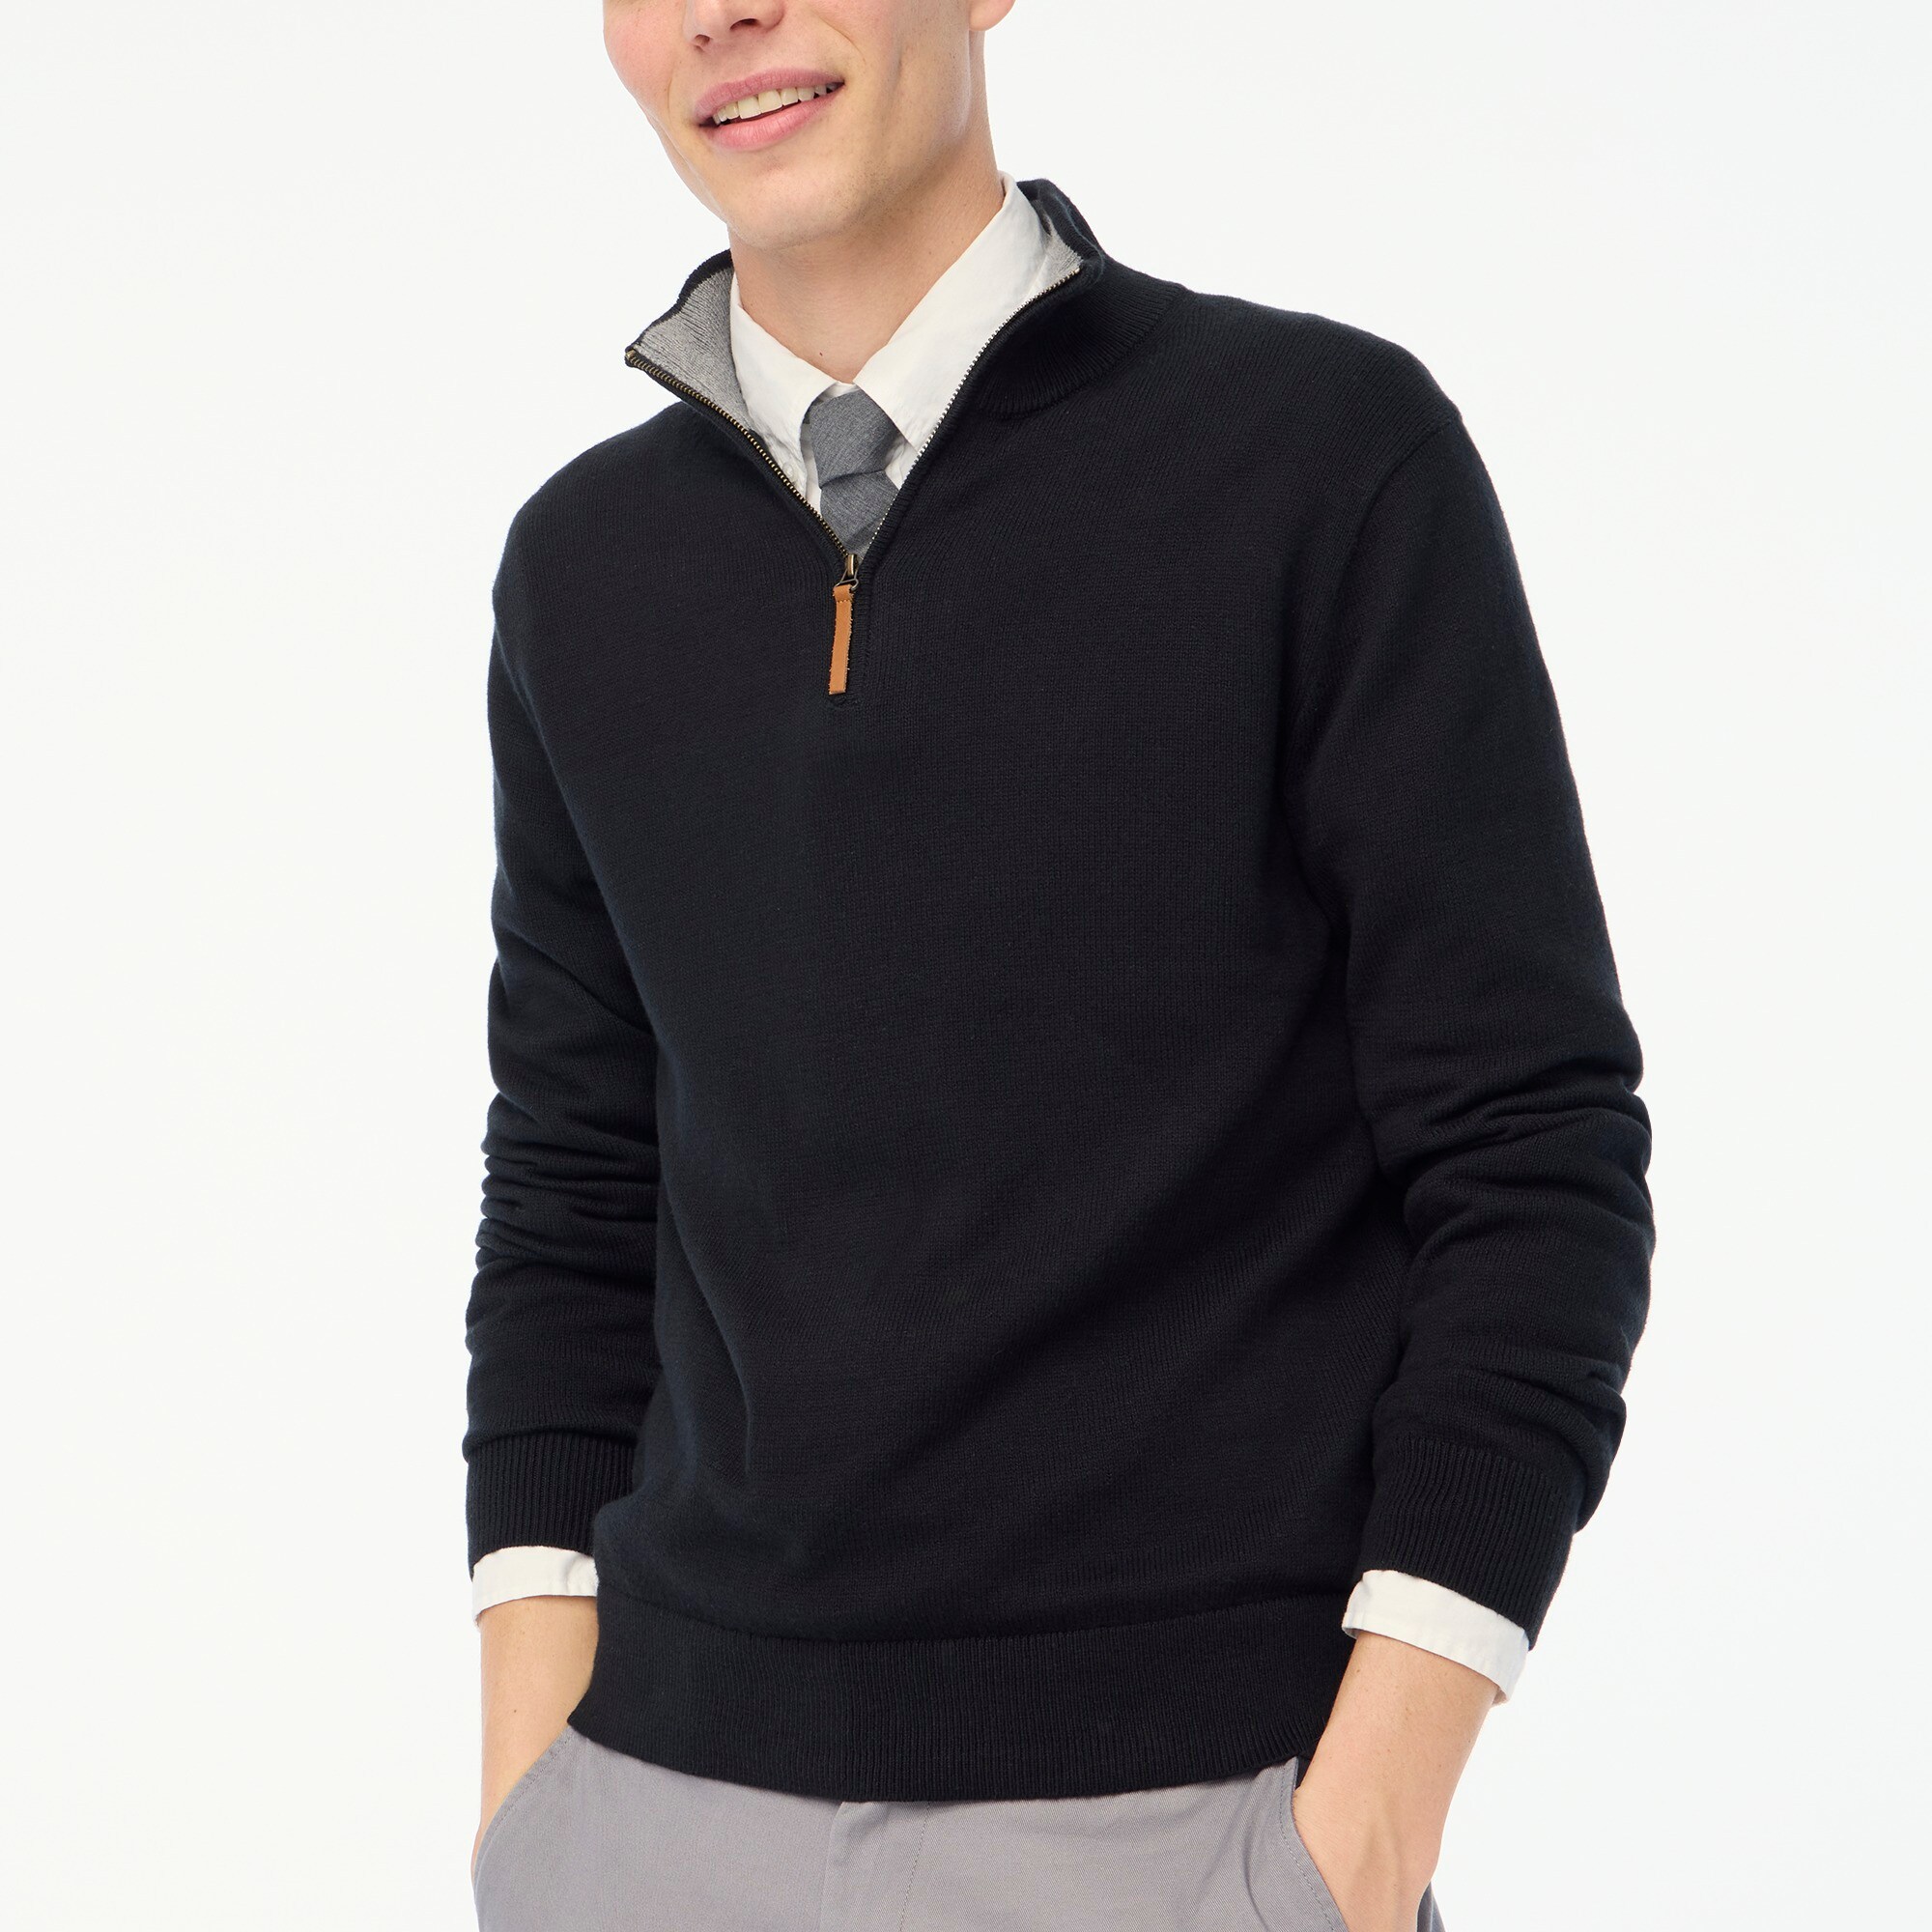 factory: cotton half-zip sweater for men, right side, view zoomed